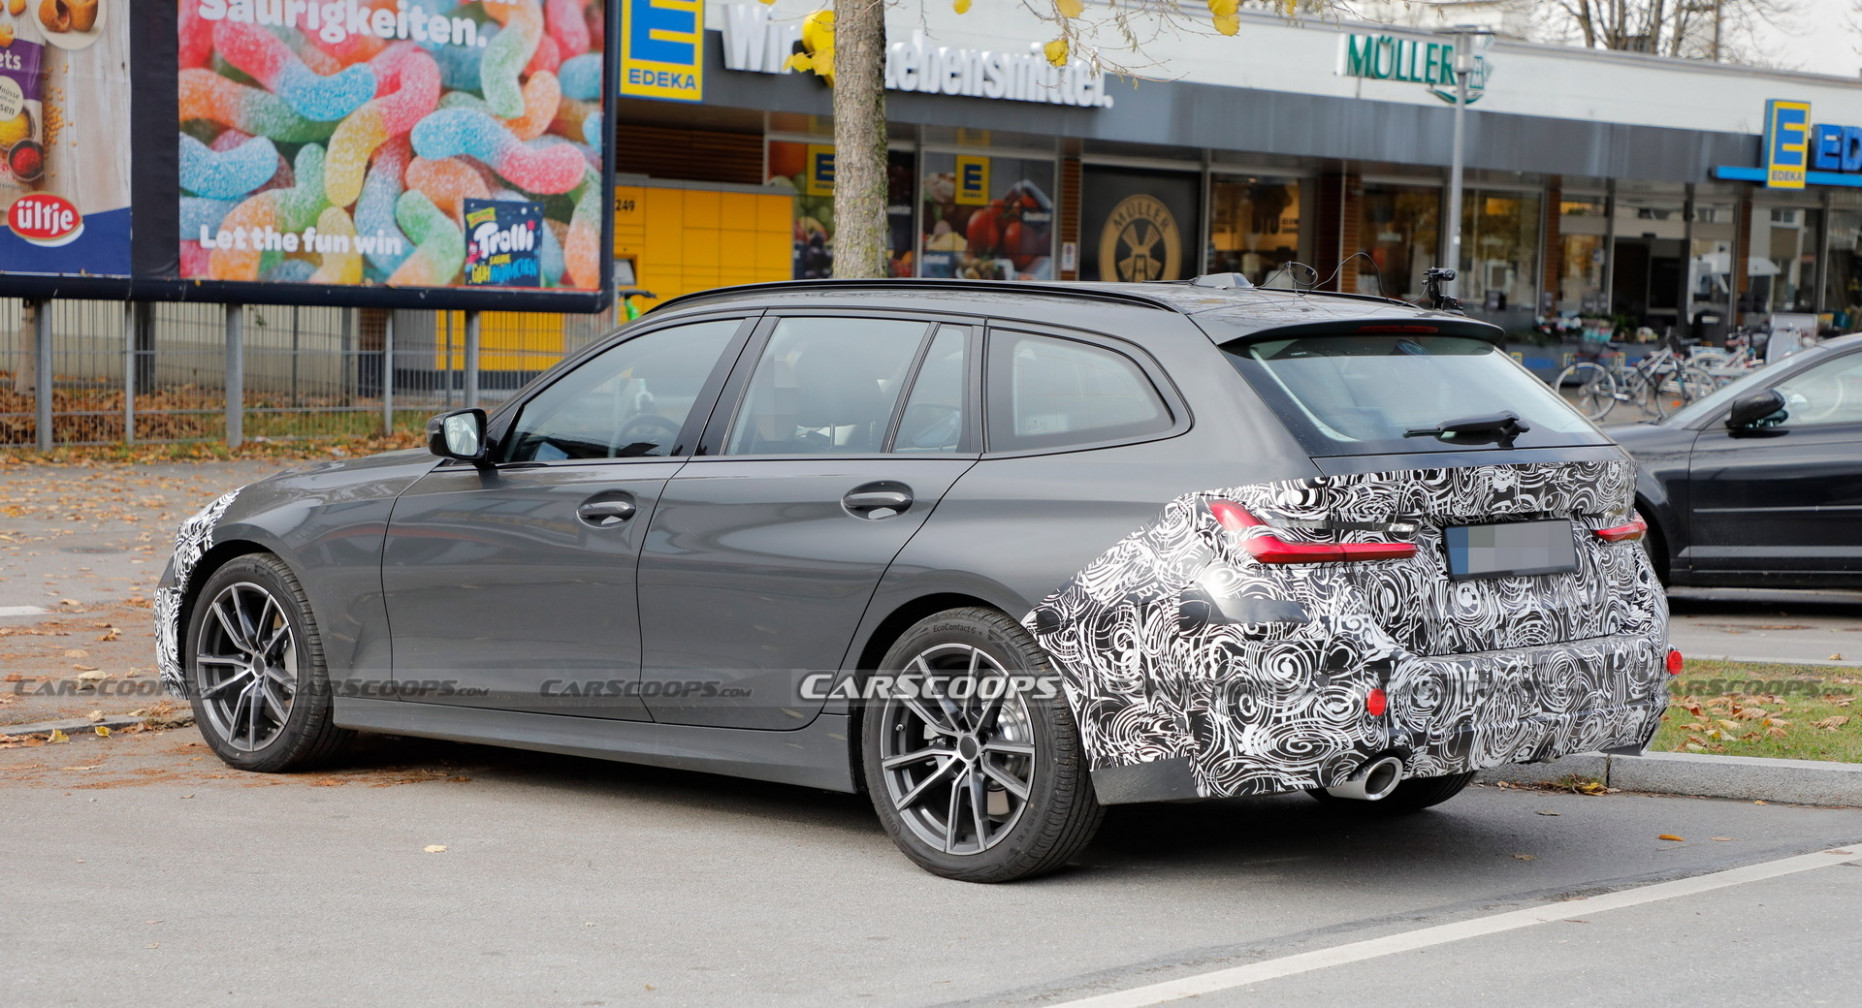 Facelifted 5 Bmw 5 Series Touring Spied For The First Time 2019 Vs 2023 Bmw 3 Series